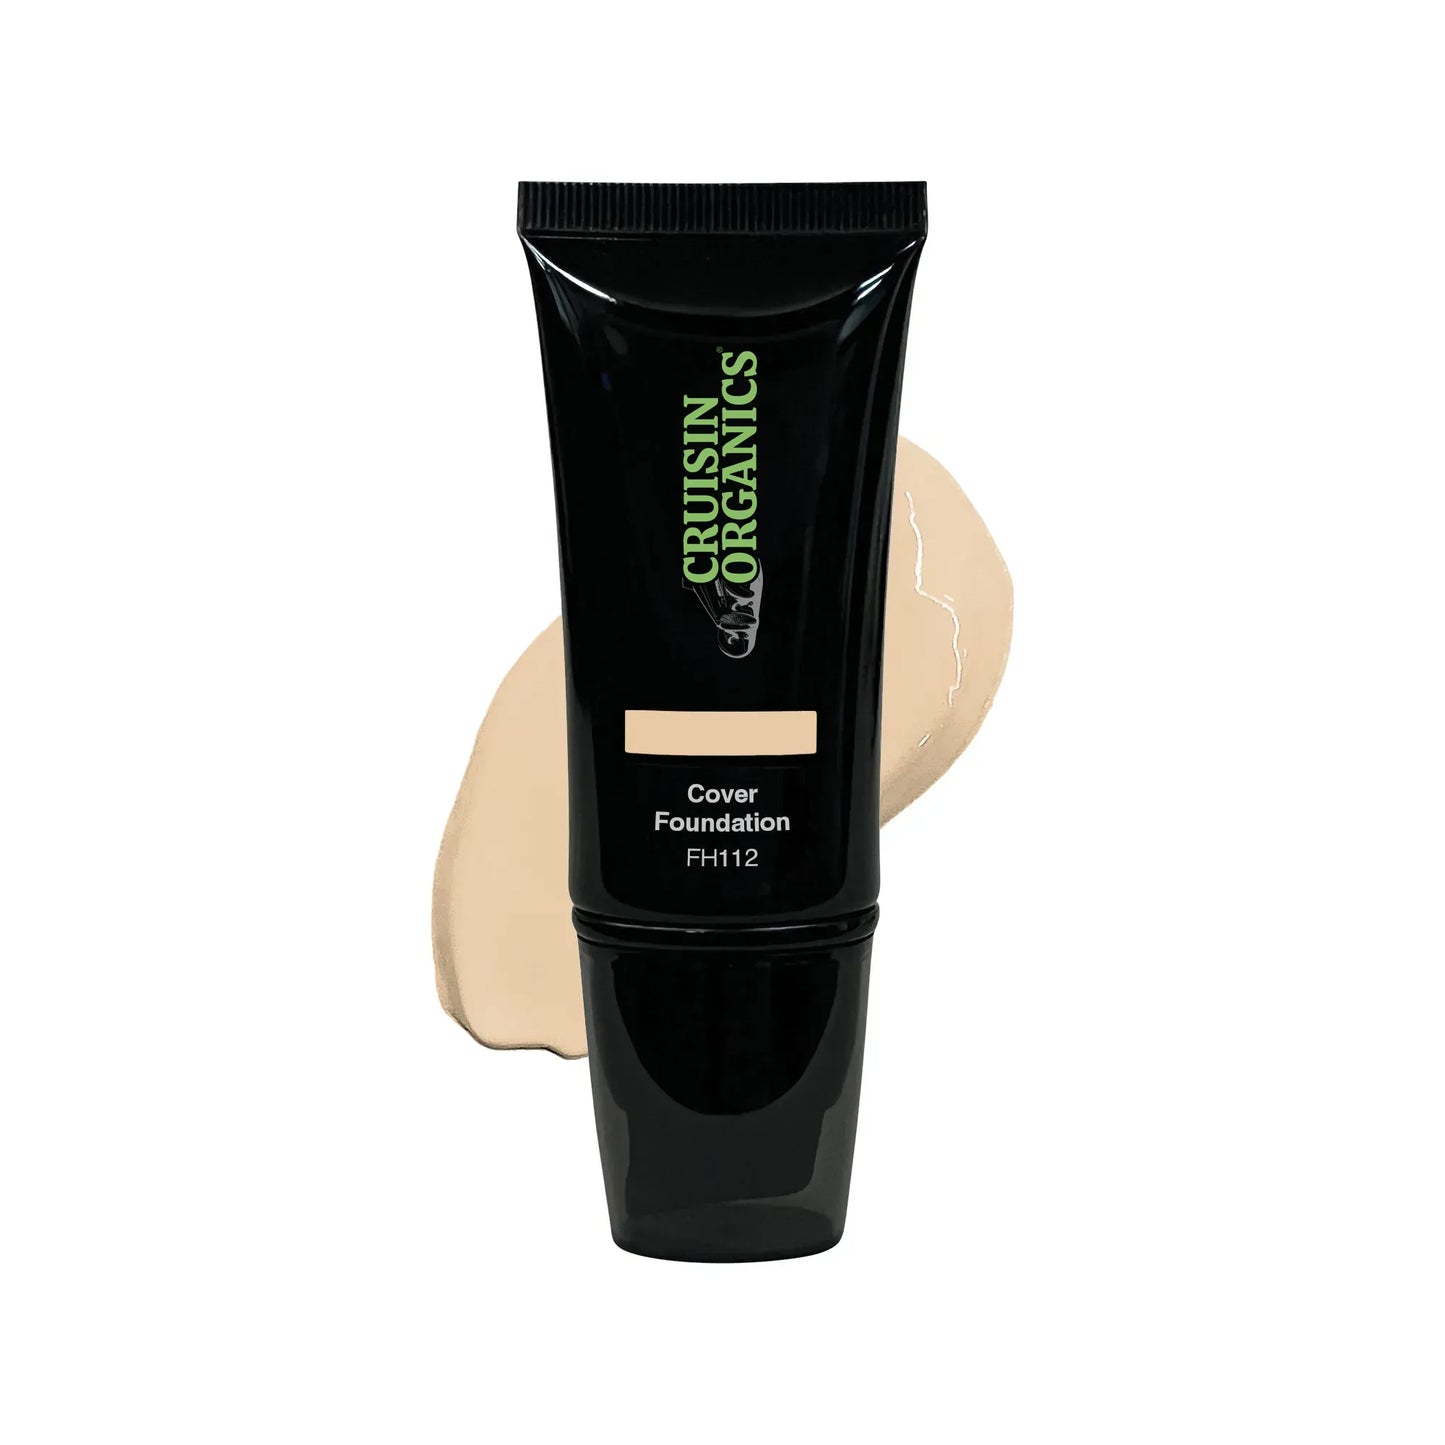 For the face and neck, use Cruisin Organics Bella Foundation. Cosmetic products can benefit from dimethicone's good stability, good spreadability, high compressibility, more accurate leveling, and favorable adherence.  Advantages of dimethicone in cosmetics are its soft feel and lubricating properties on the skin.